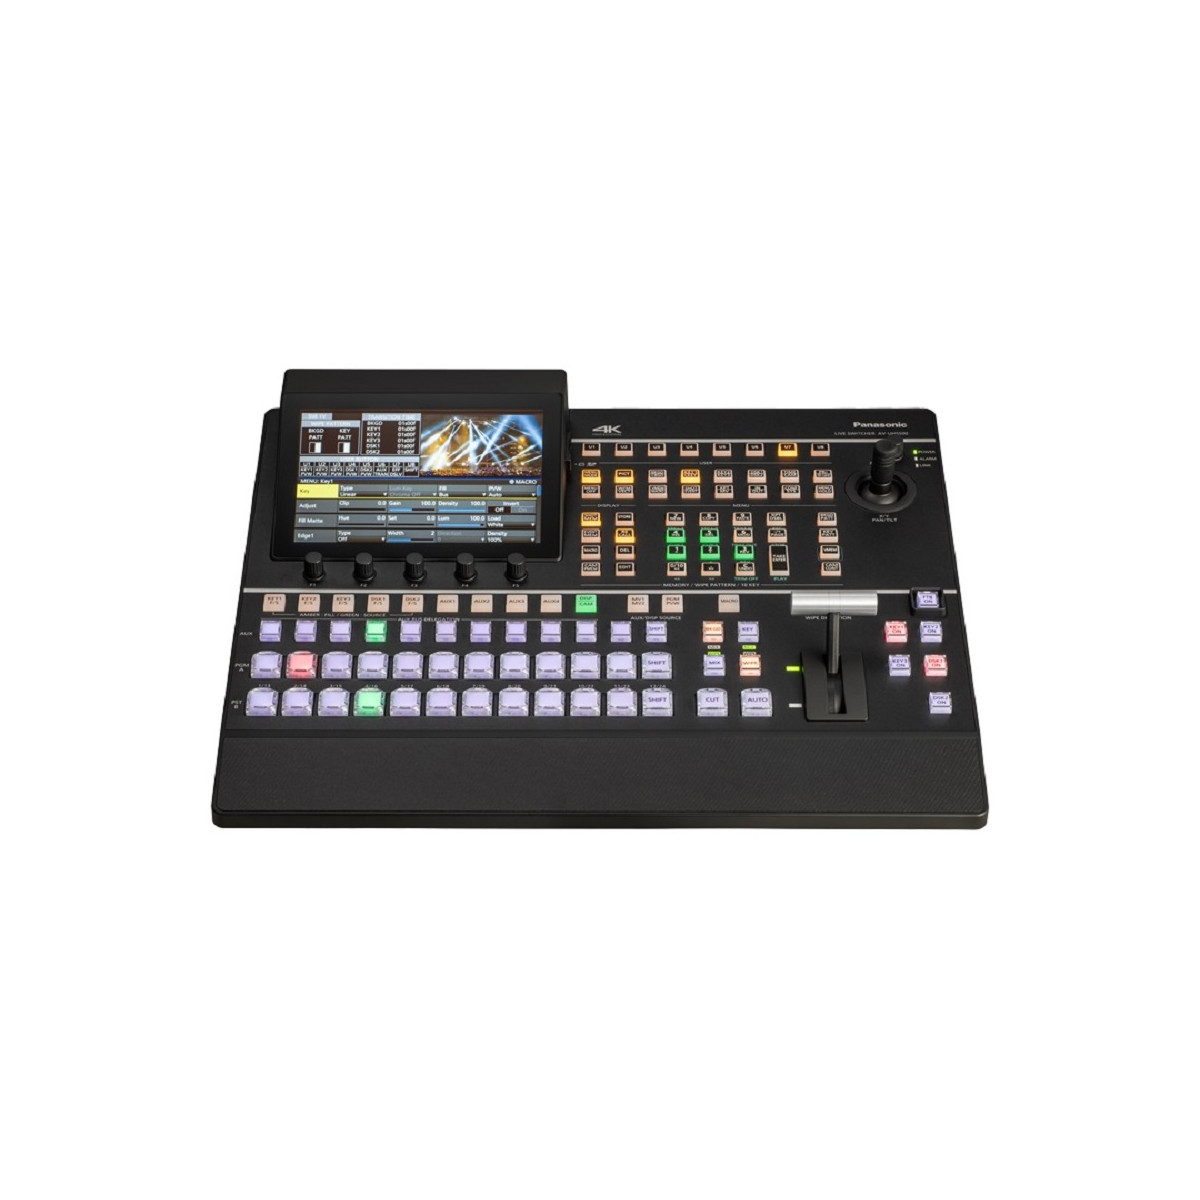 Compact Switcher for 4K(UHD) Live Production